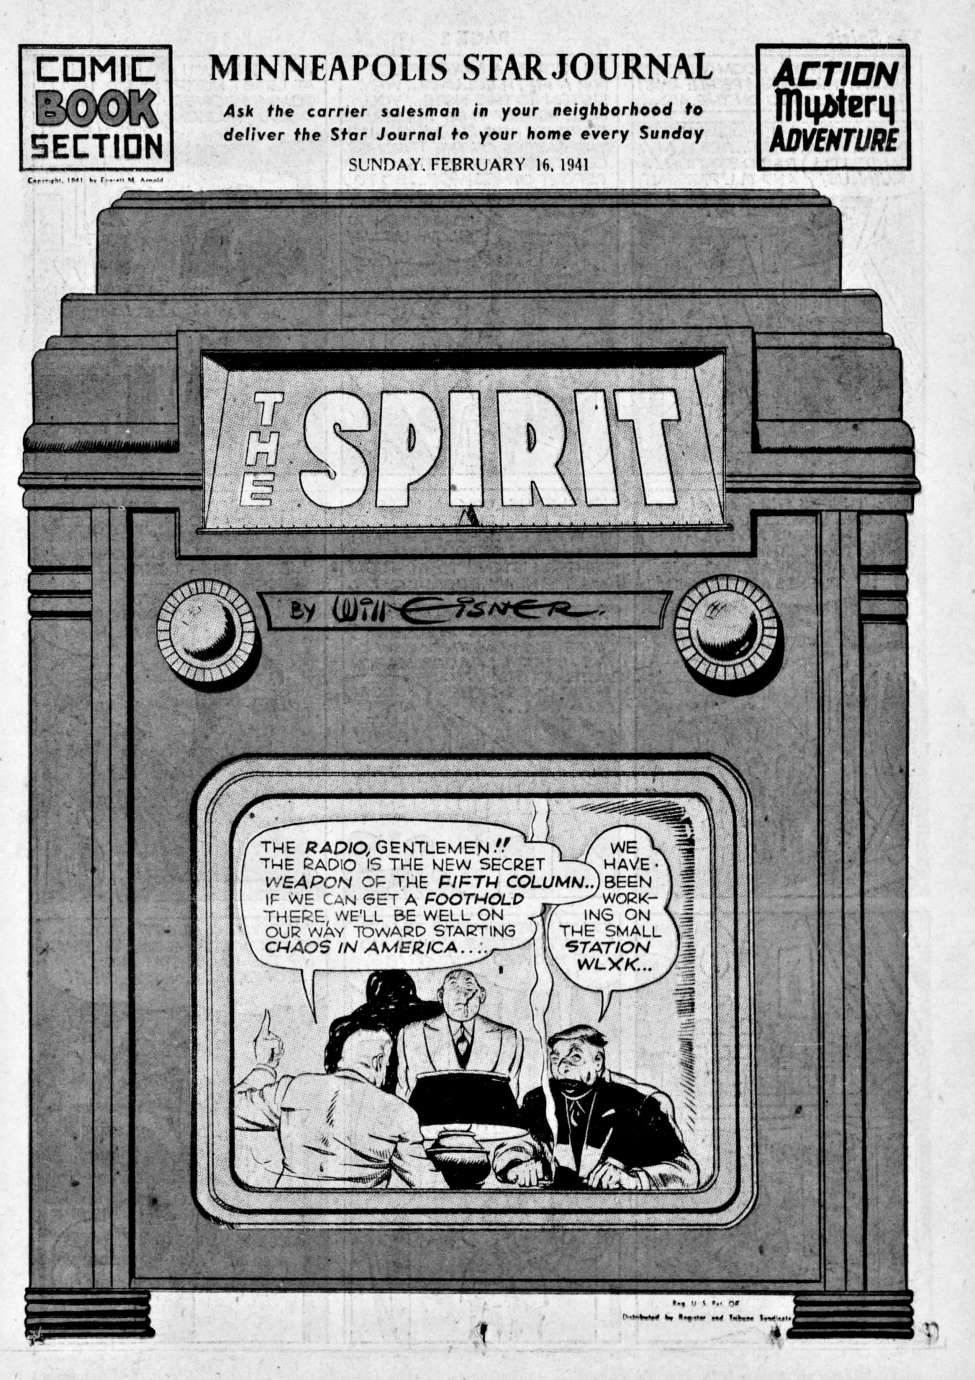 Book Cover For The Spirit (1941-02-16) - Minneapolis Star Journal (b/w)